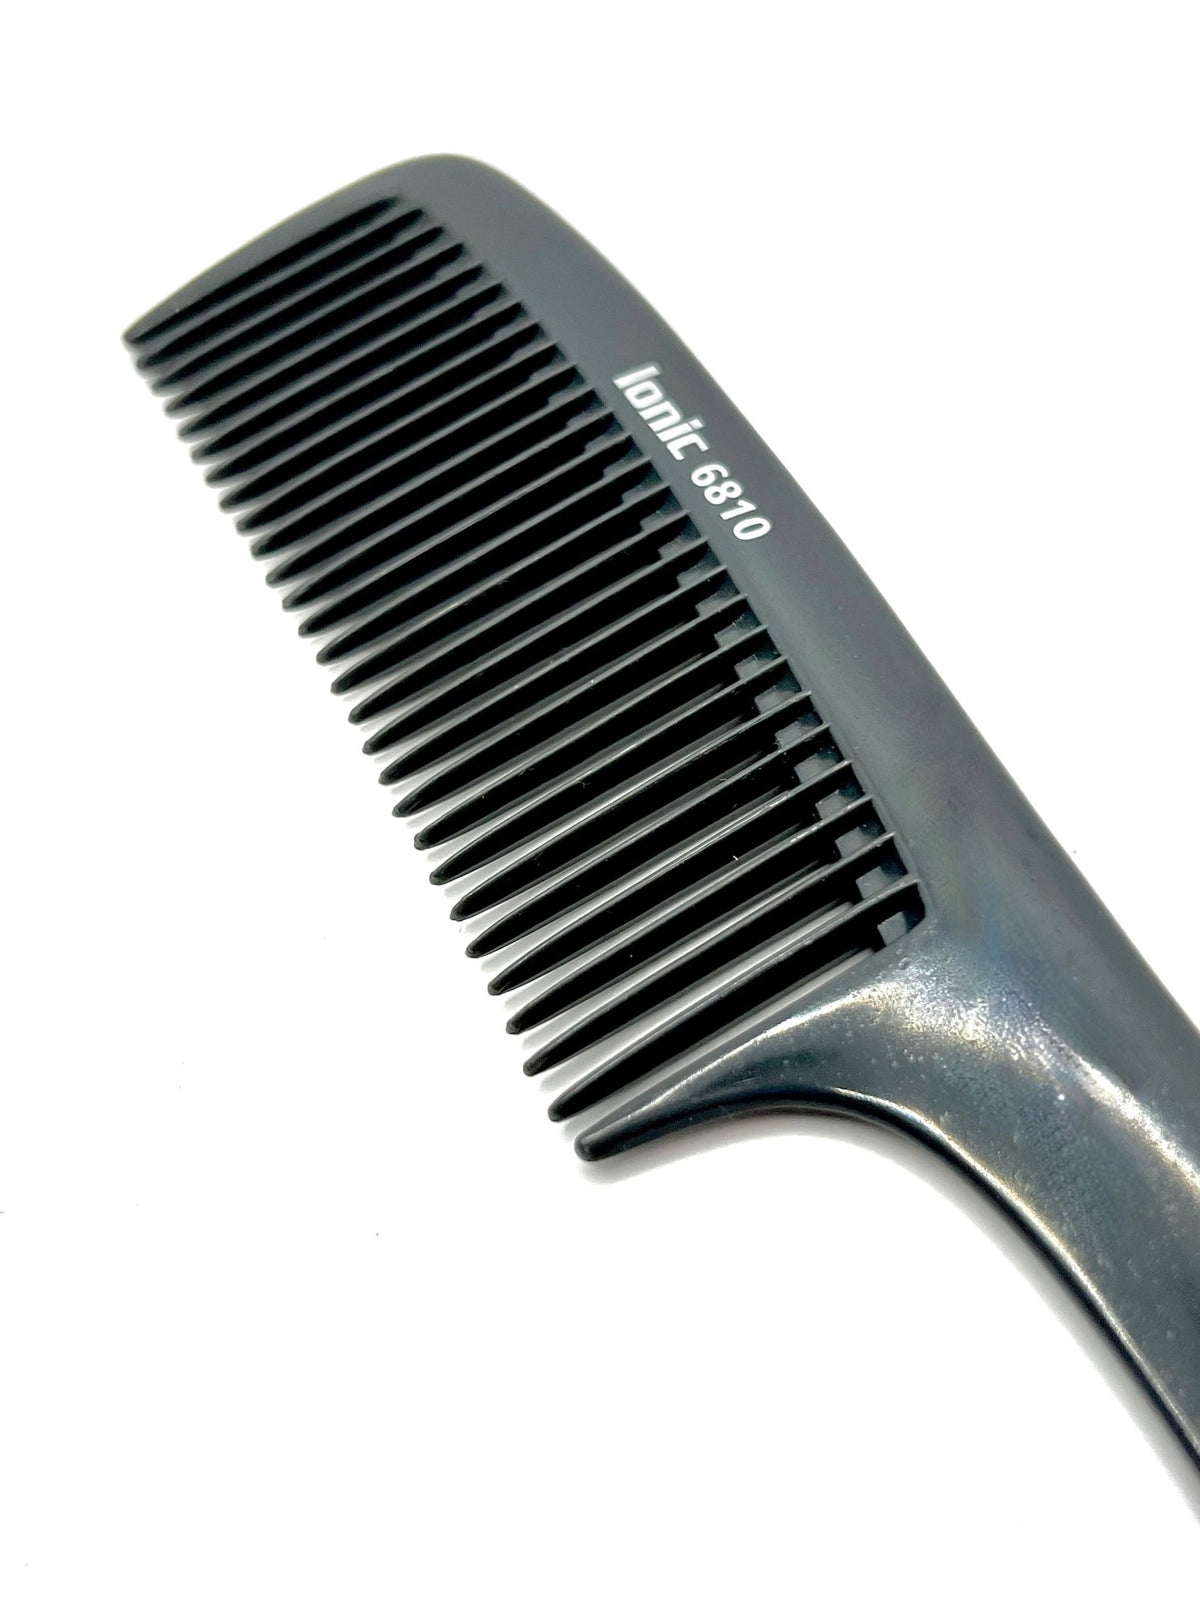 Large Medium Tooth Comb 6810 - Beauty Hair Products LtdHair Comb